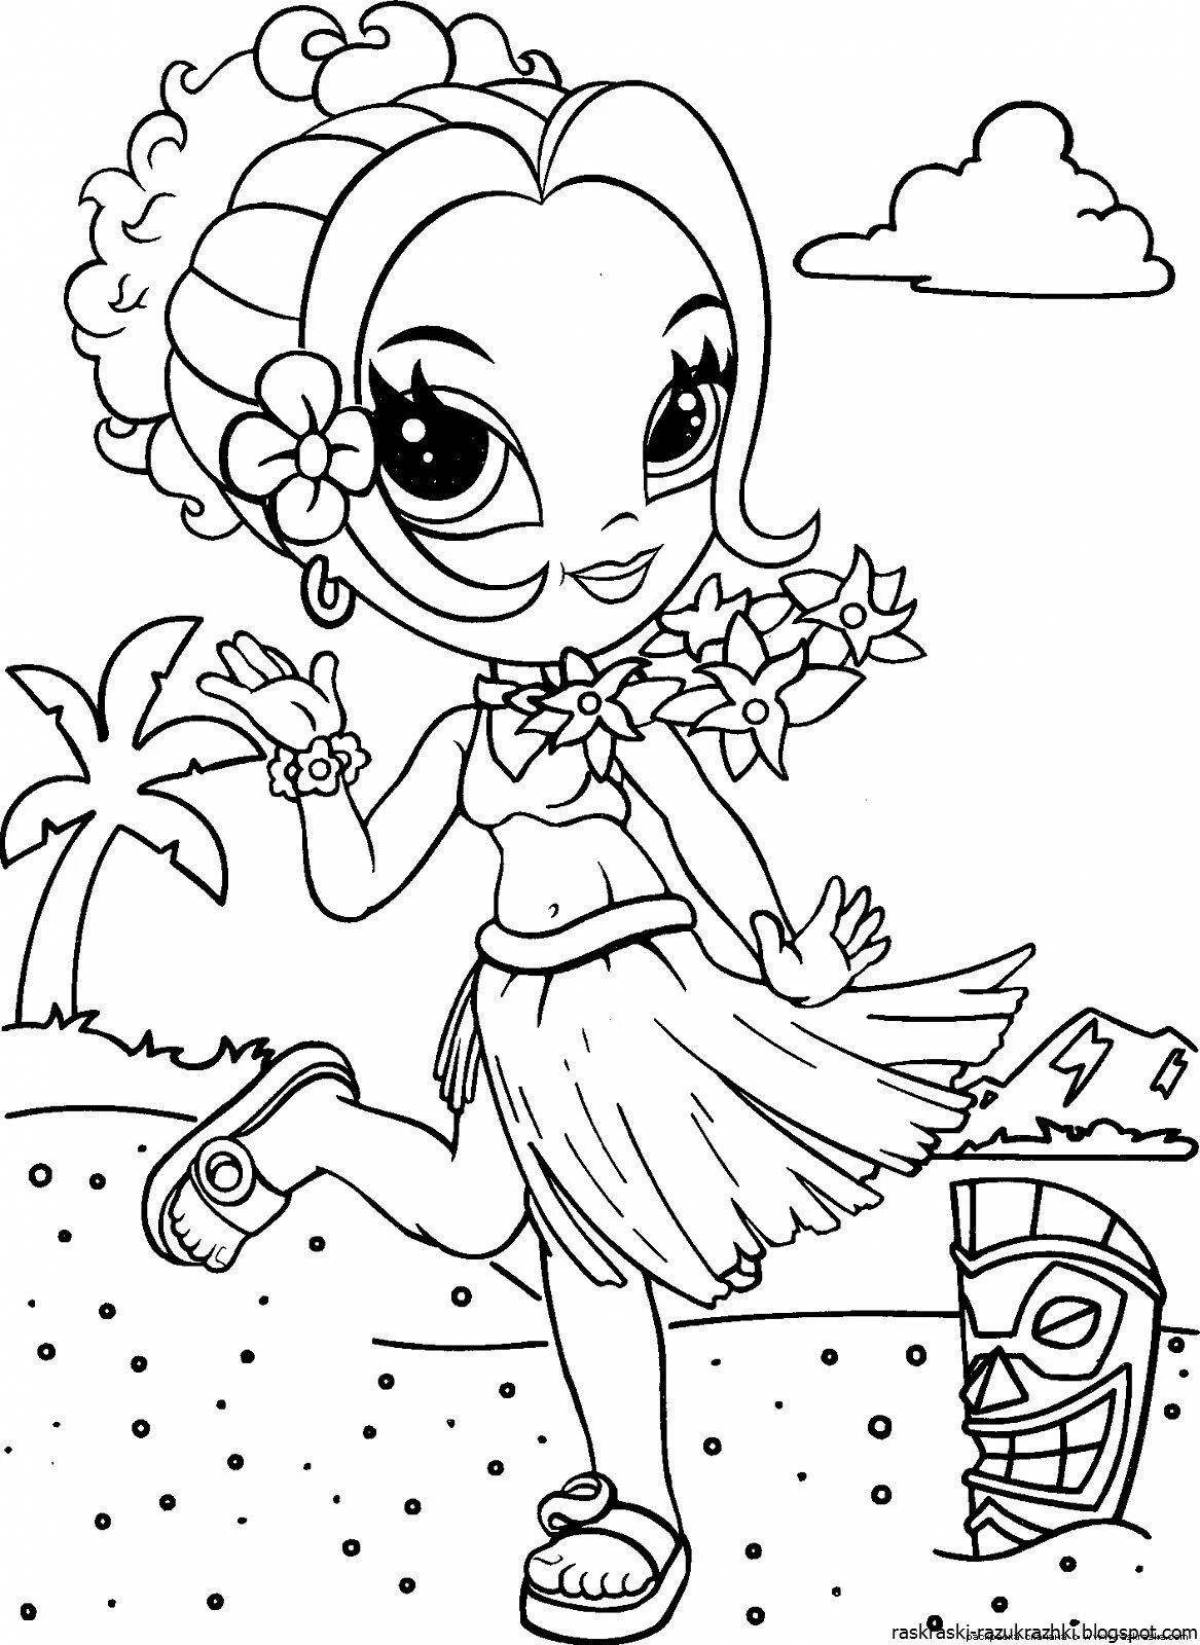 Creative coloring book for boys and girls aged 6-7